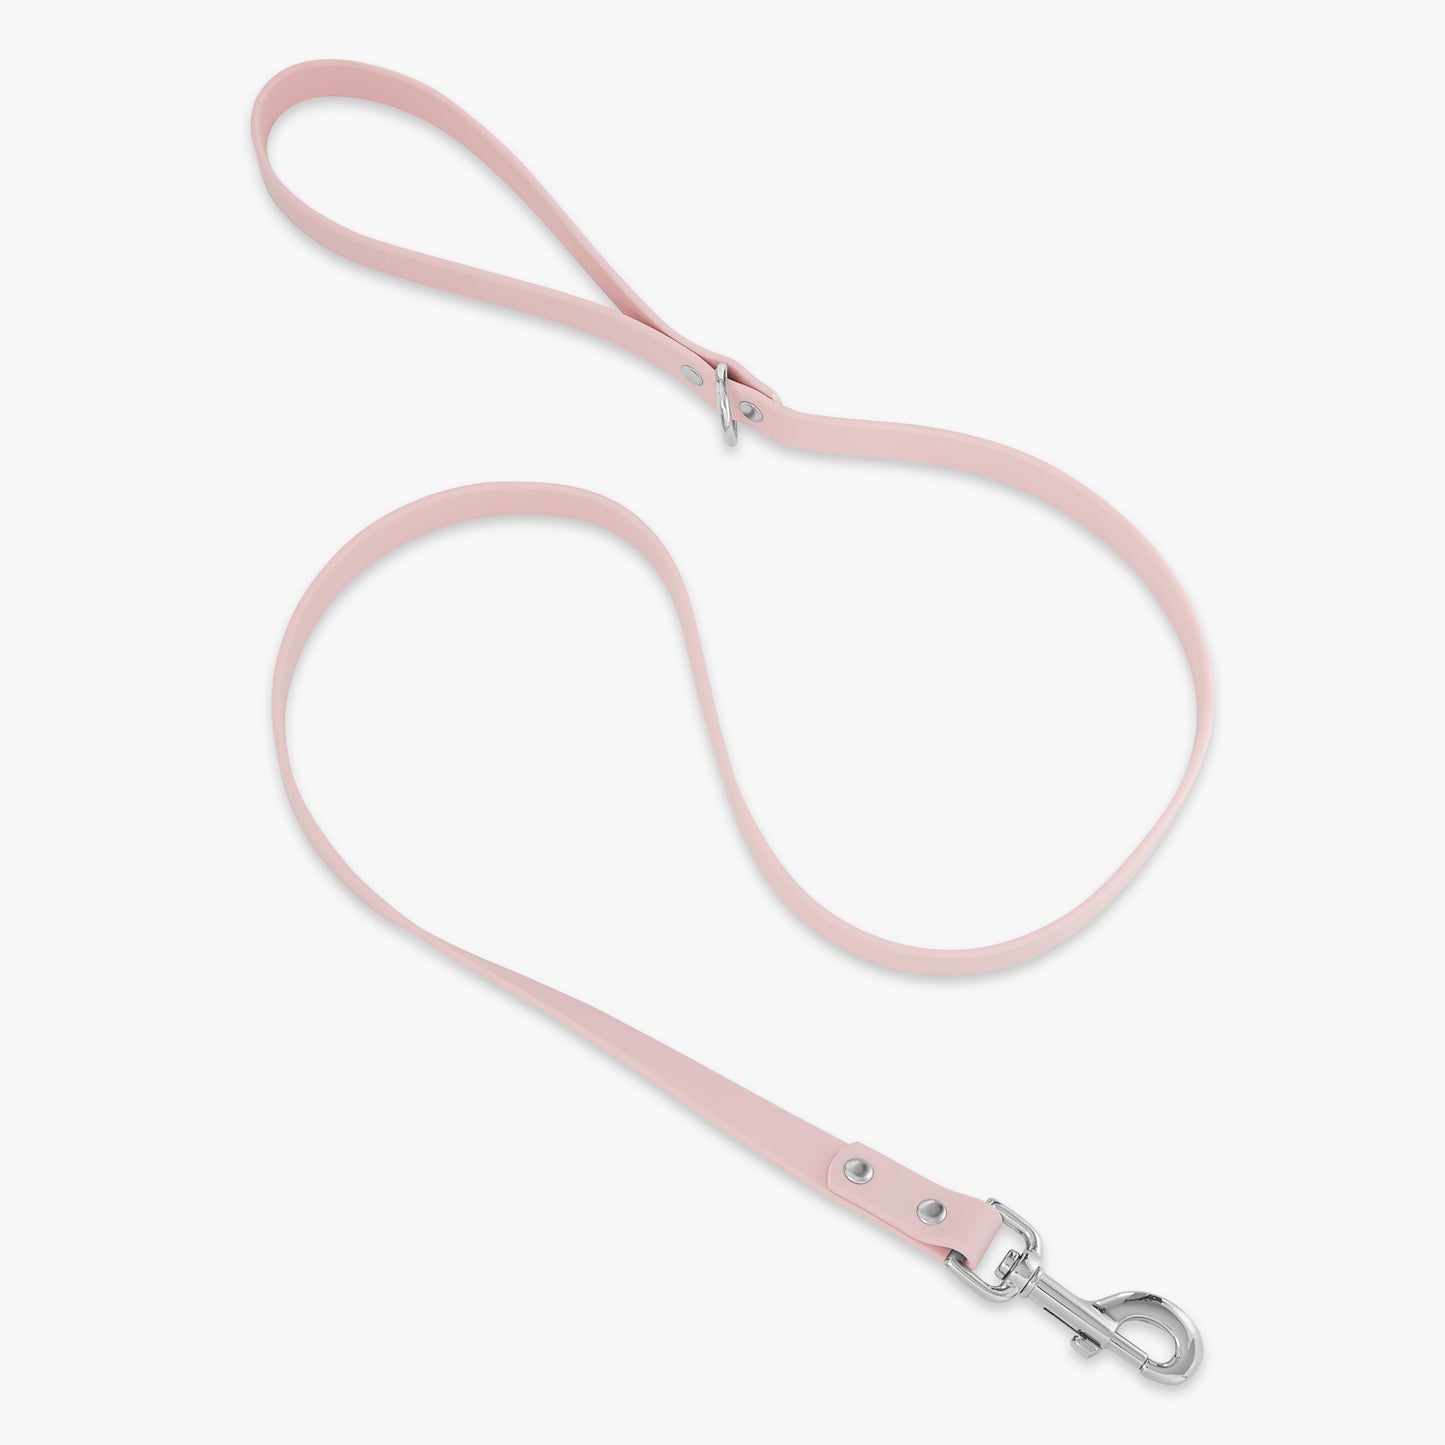 pink and silver trill paws pvc dog leash on white background